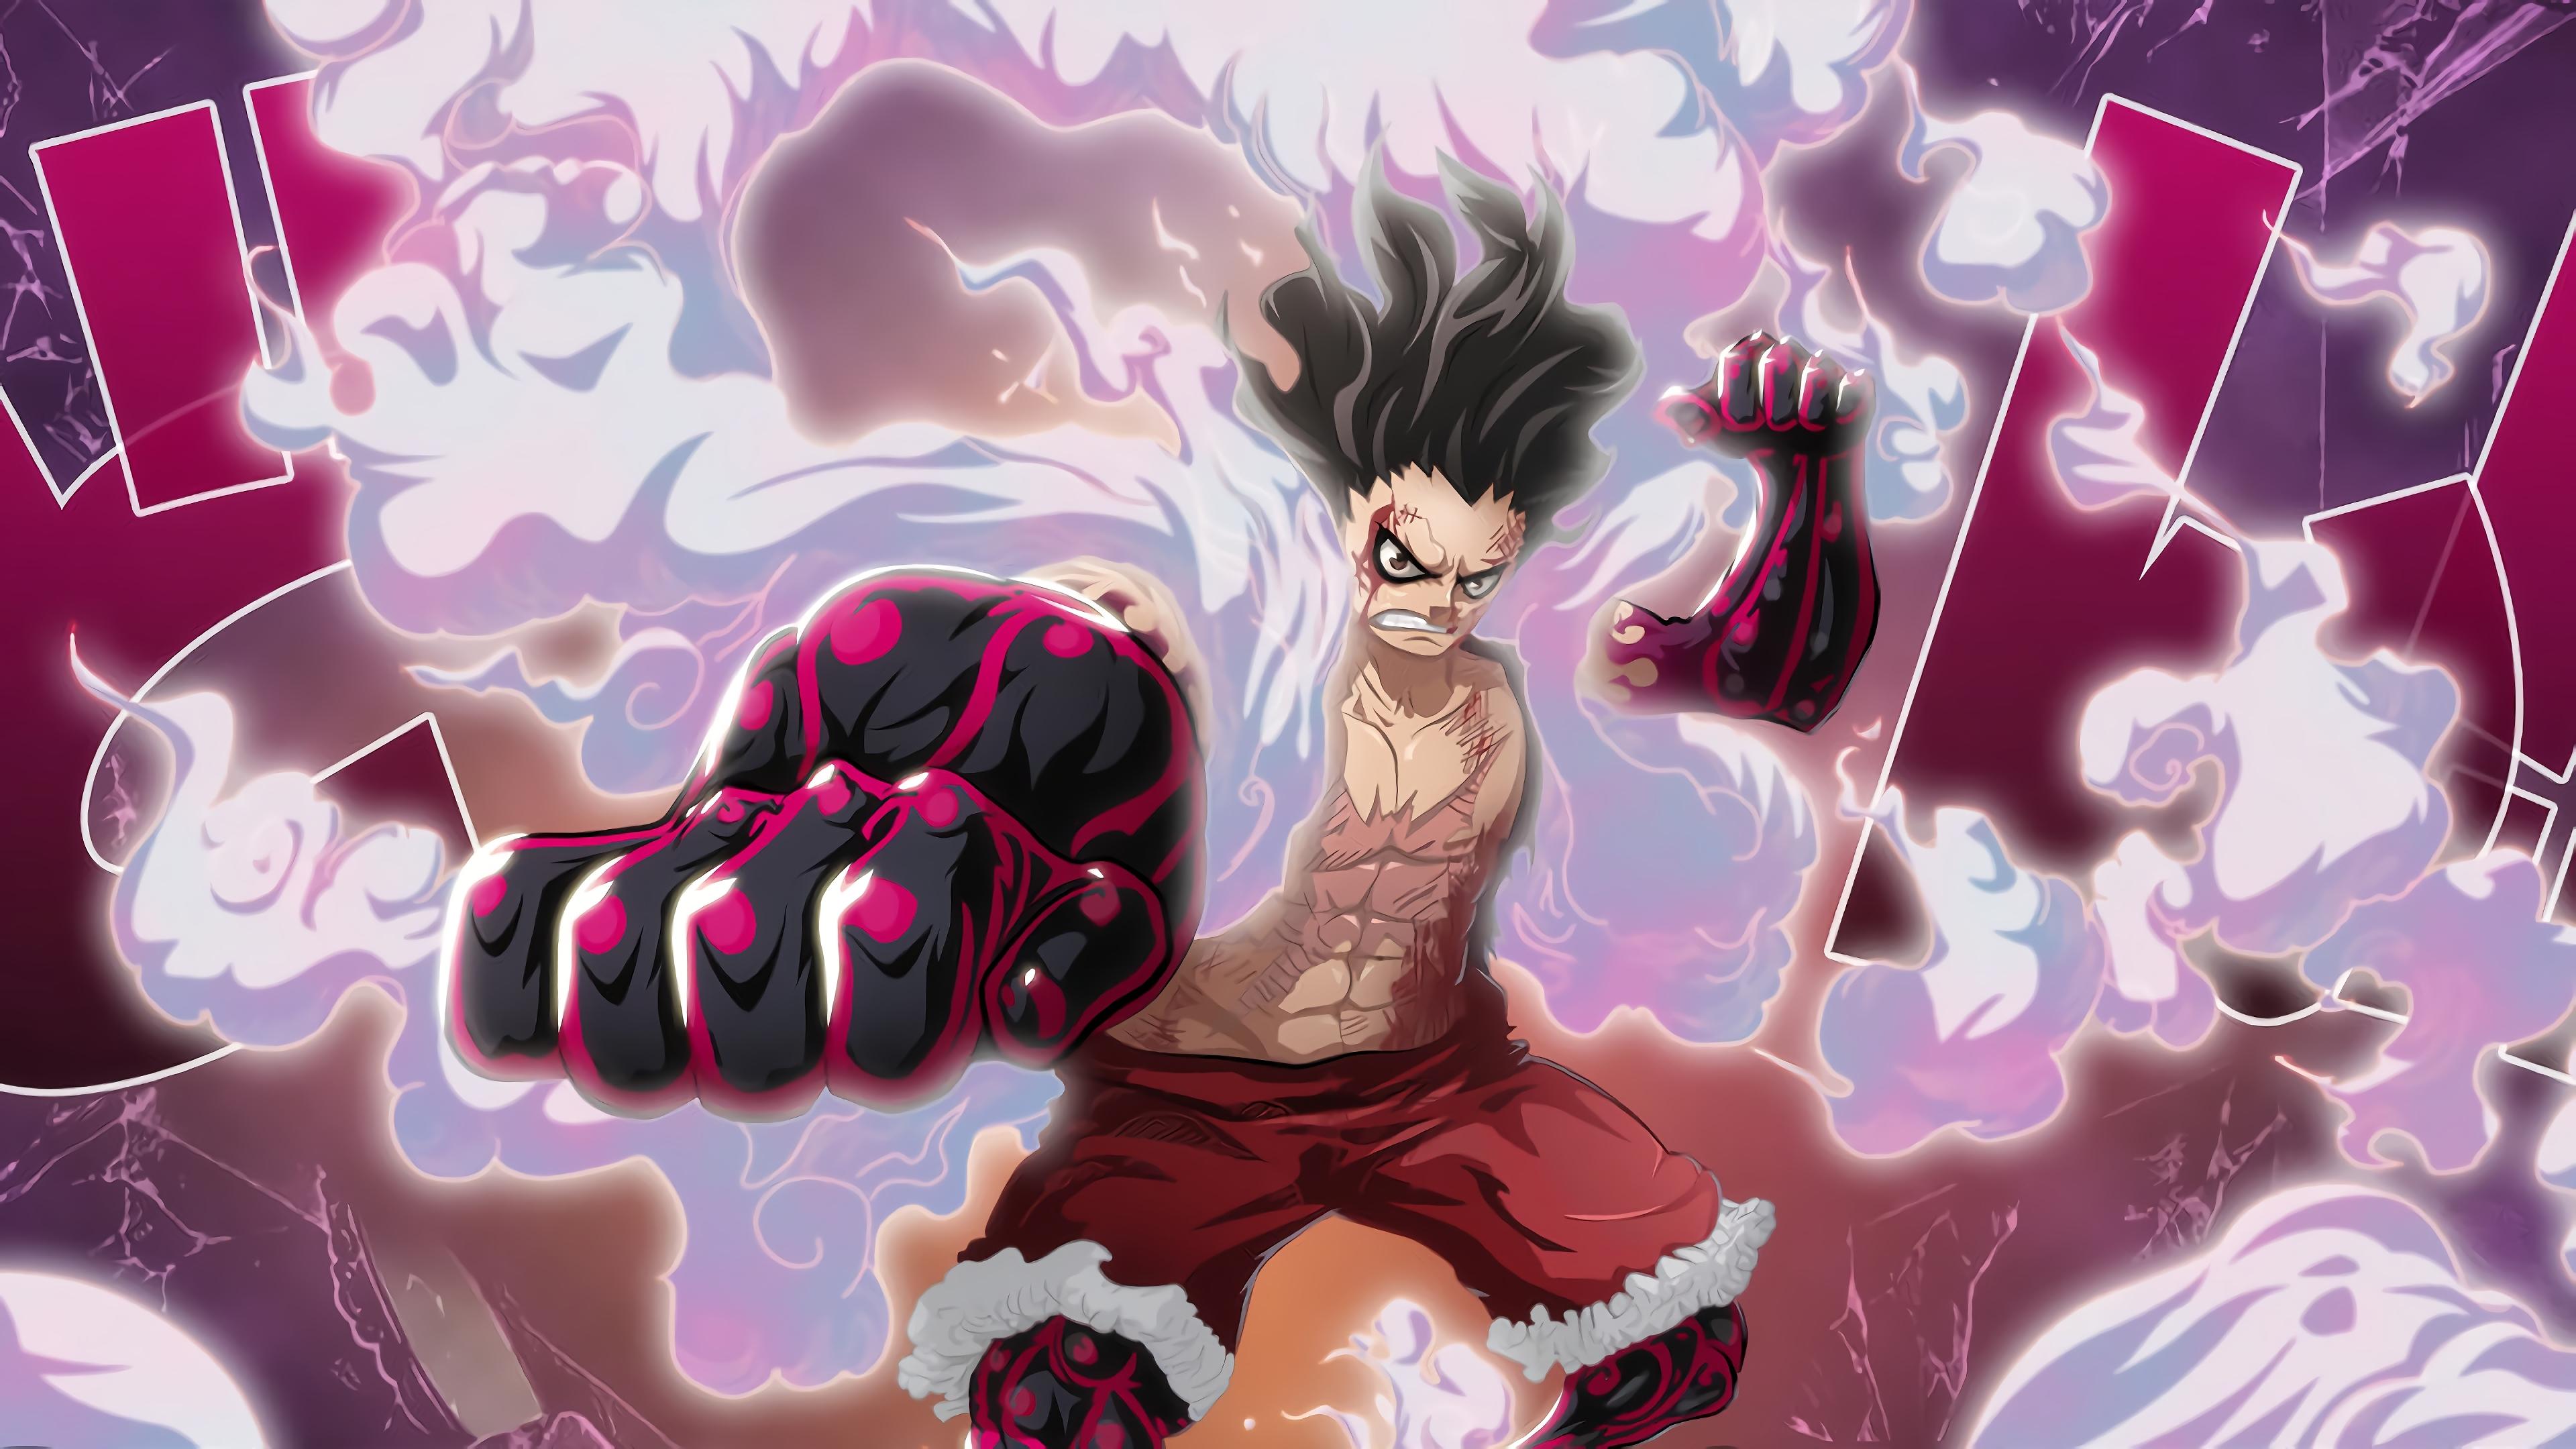 3840 x 2160 · jpeg - One Piece Monkey D Luffy, HD Anime, 4k Wallpapers, Images, Backgrounds ...